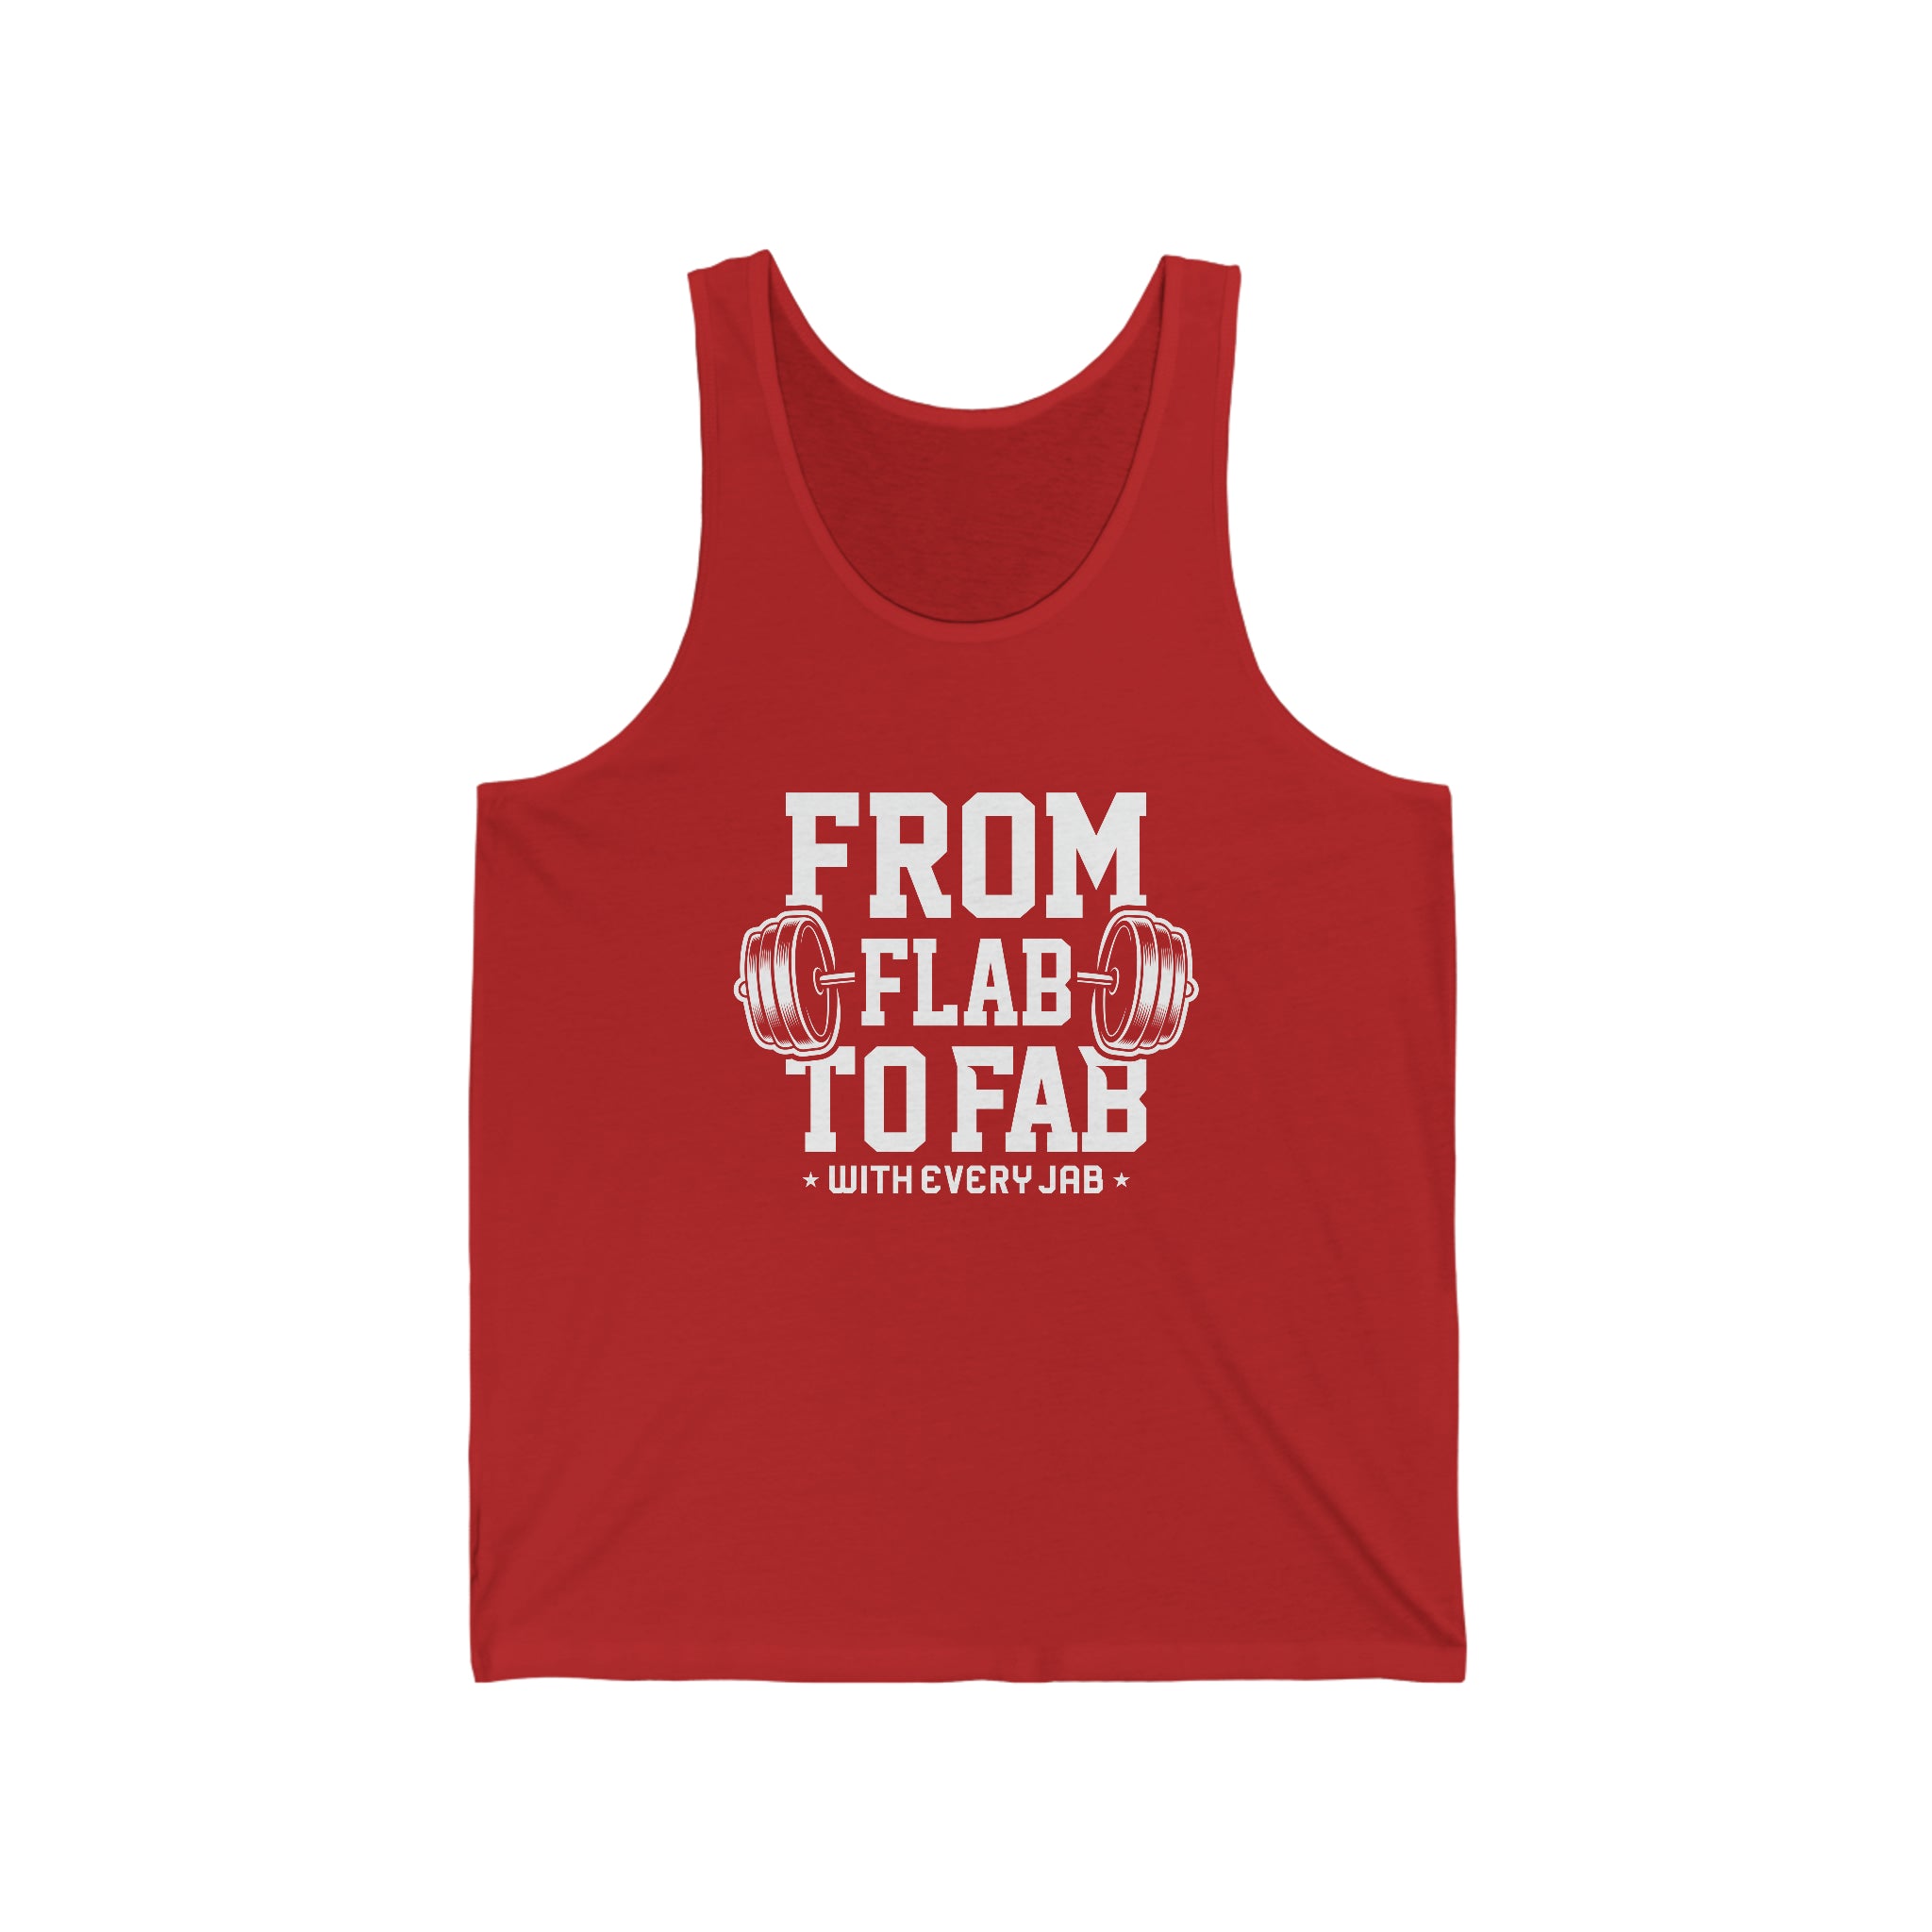 "From Flab to Fab - With Every Jab" Unisex Jersey Tank